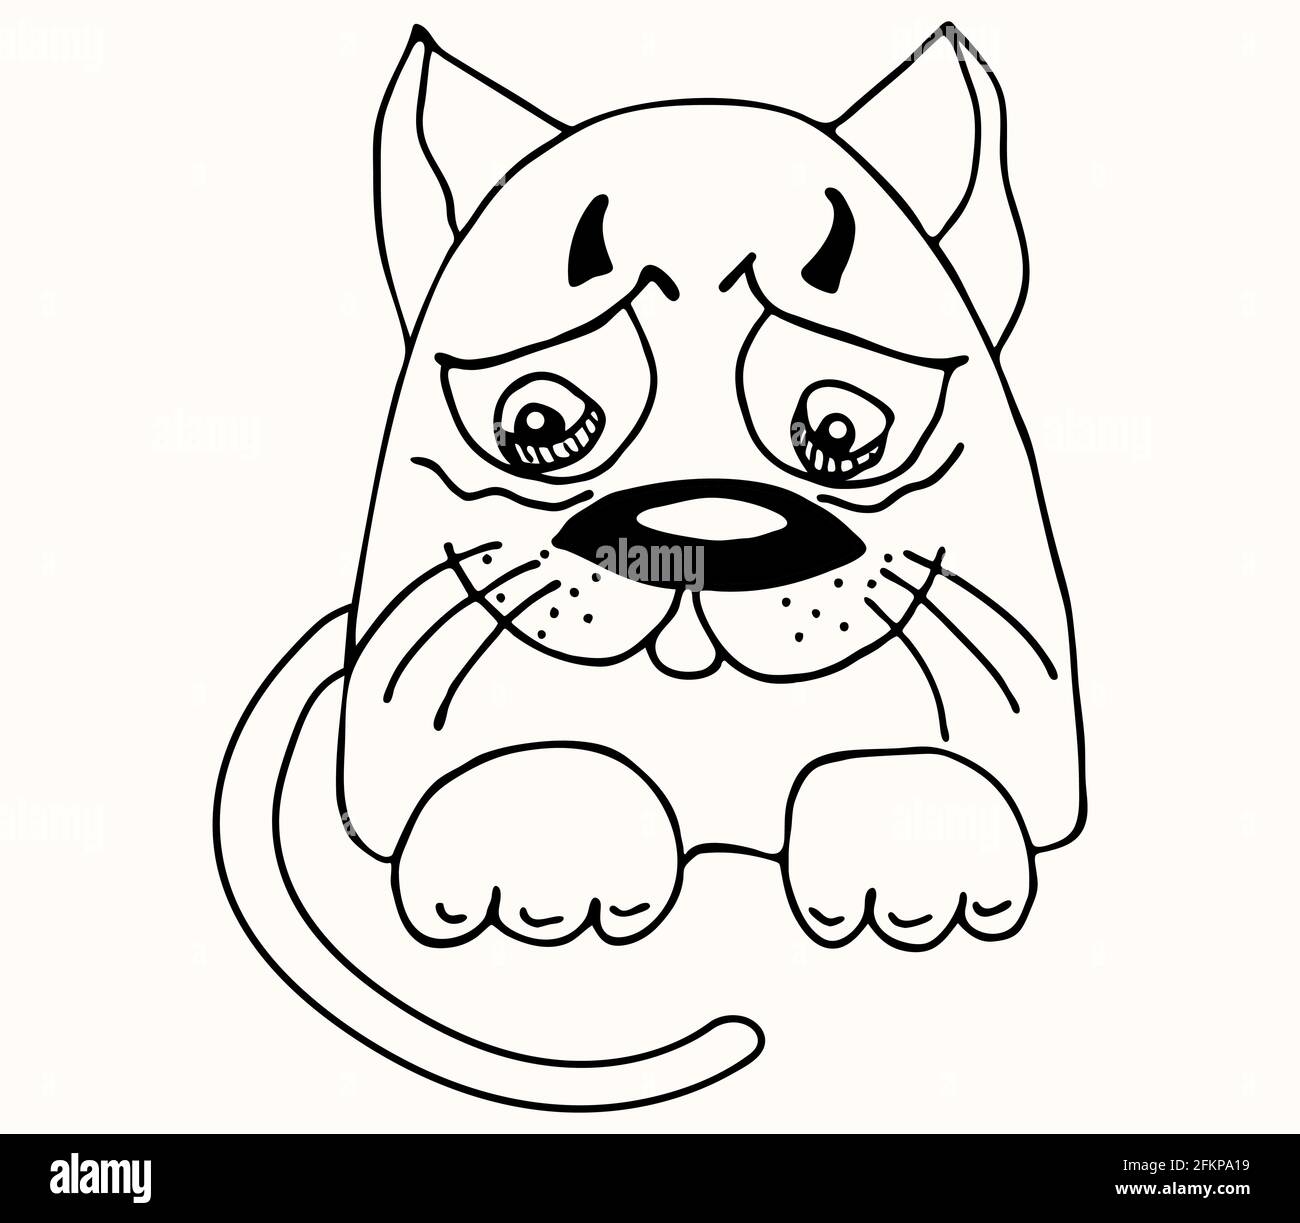 Sad and upset cat character drawn with marker. Cartoon character, imitation of a childs drawing. Stock Vector